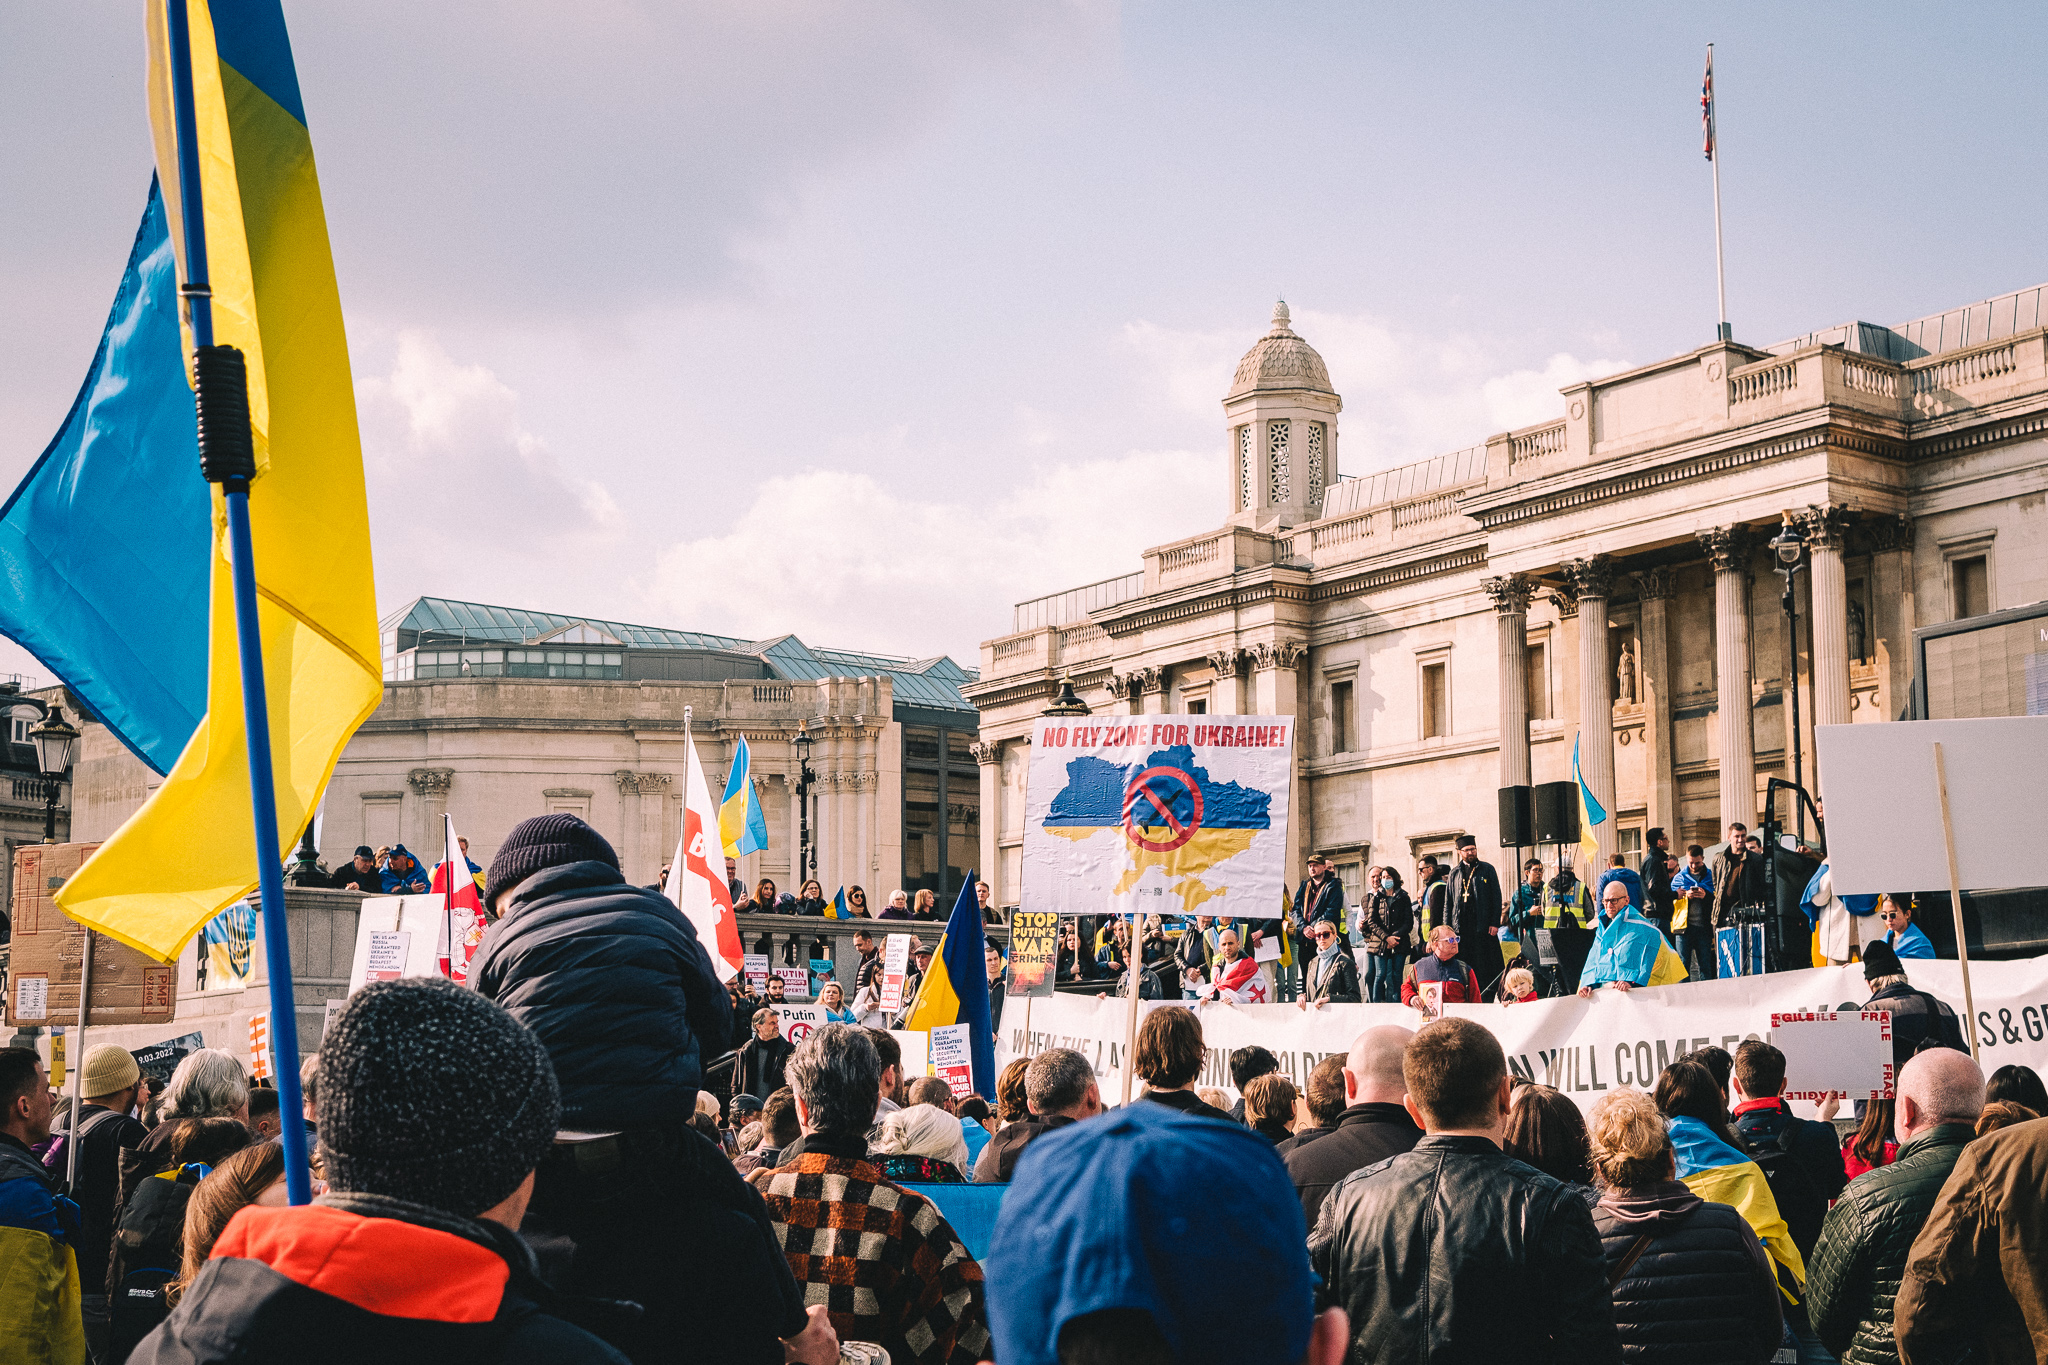 A group of protesters at the rally to support Ukraine at Trafalgar Square holding sings and banners